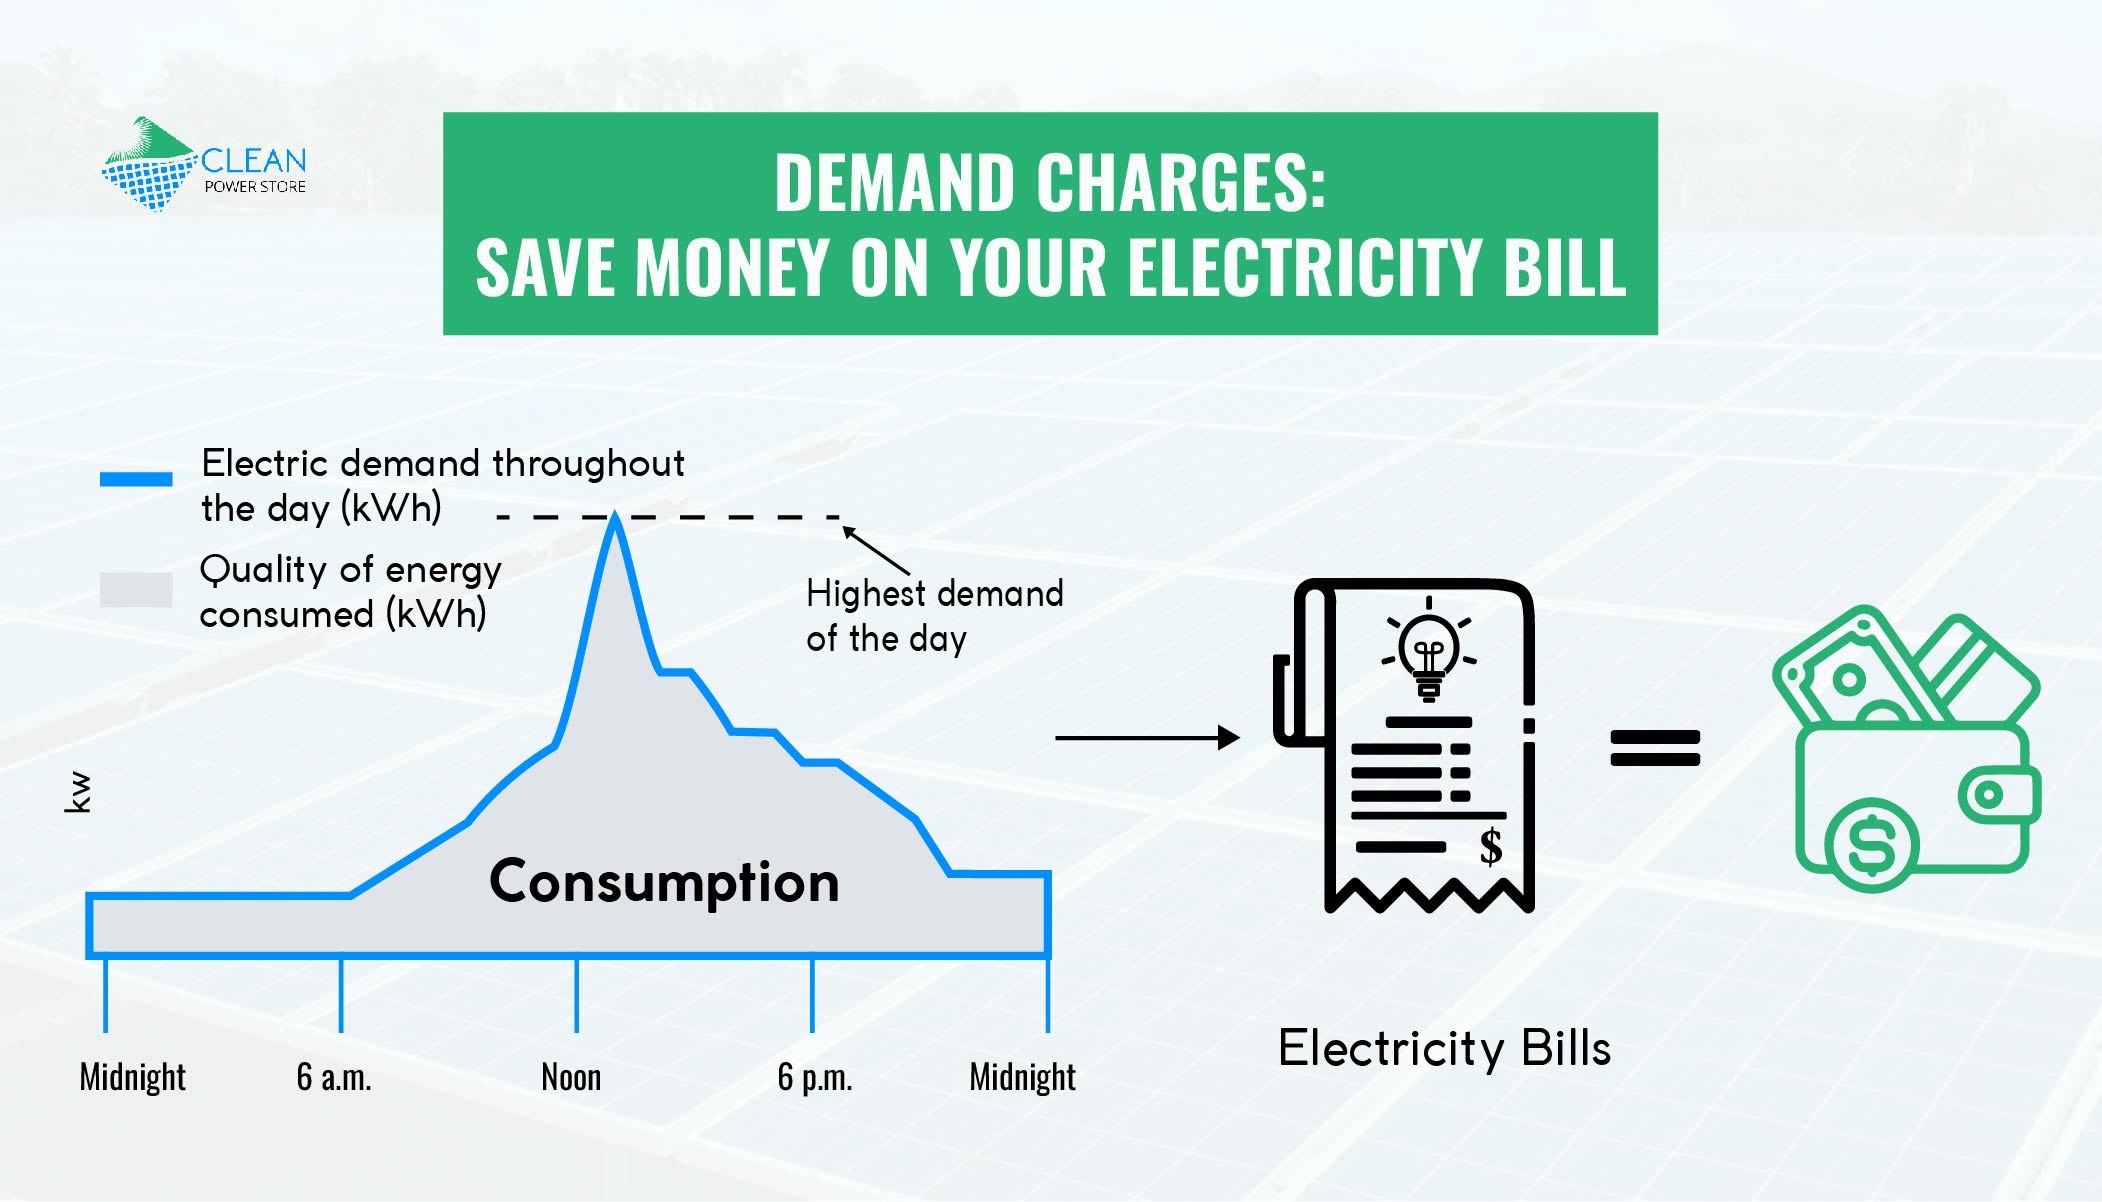 Demand Charges: Save Money on Your Electricity Bill